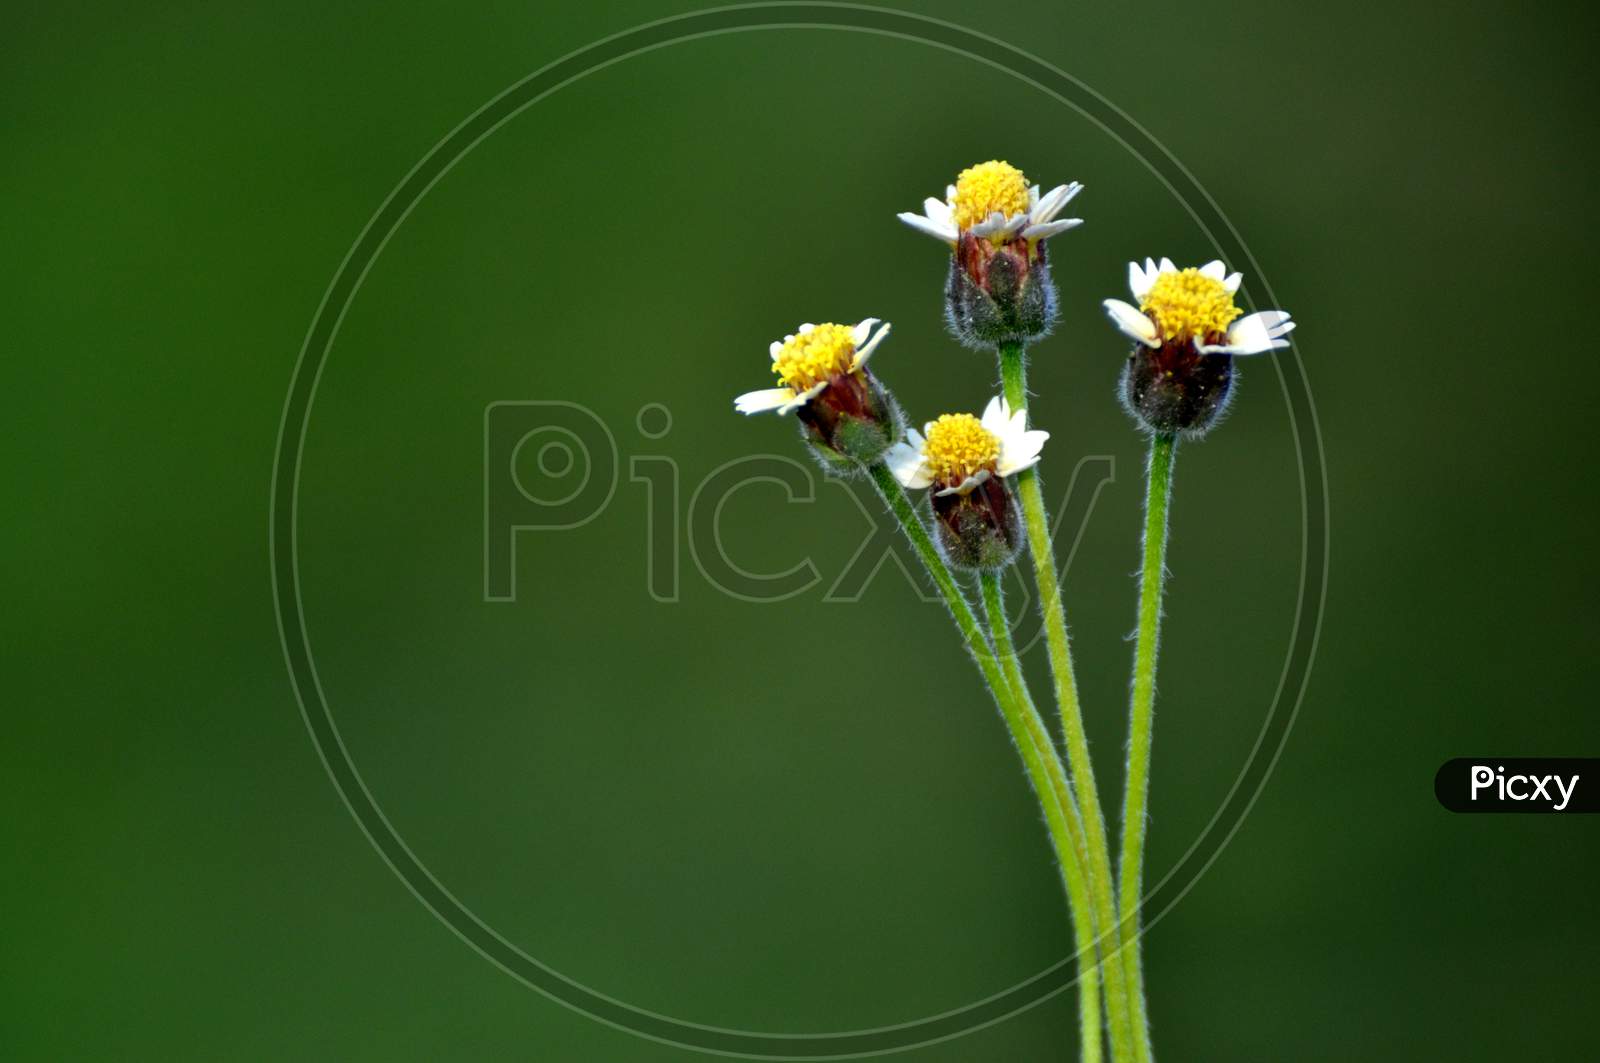 Tridax procumbens also known as Shaggy soldier - a common field plant